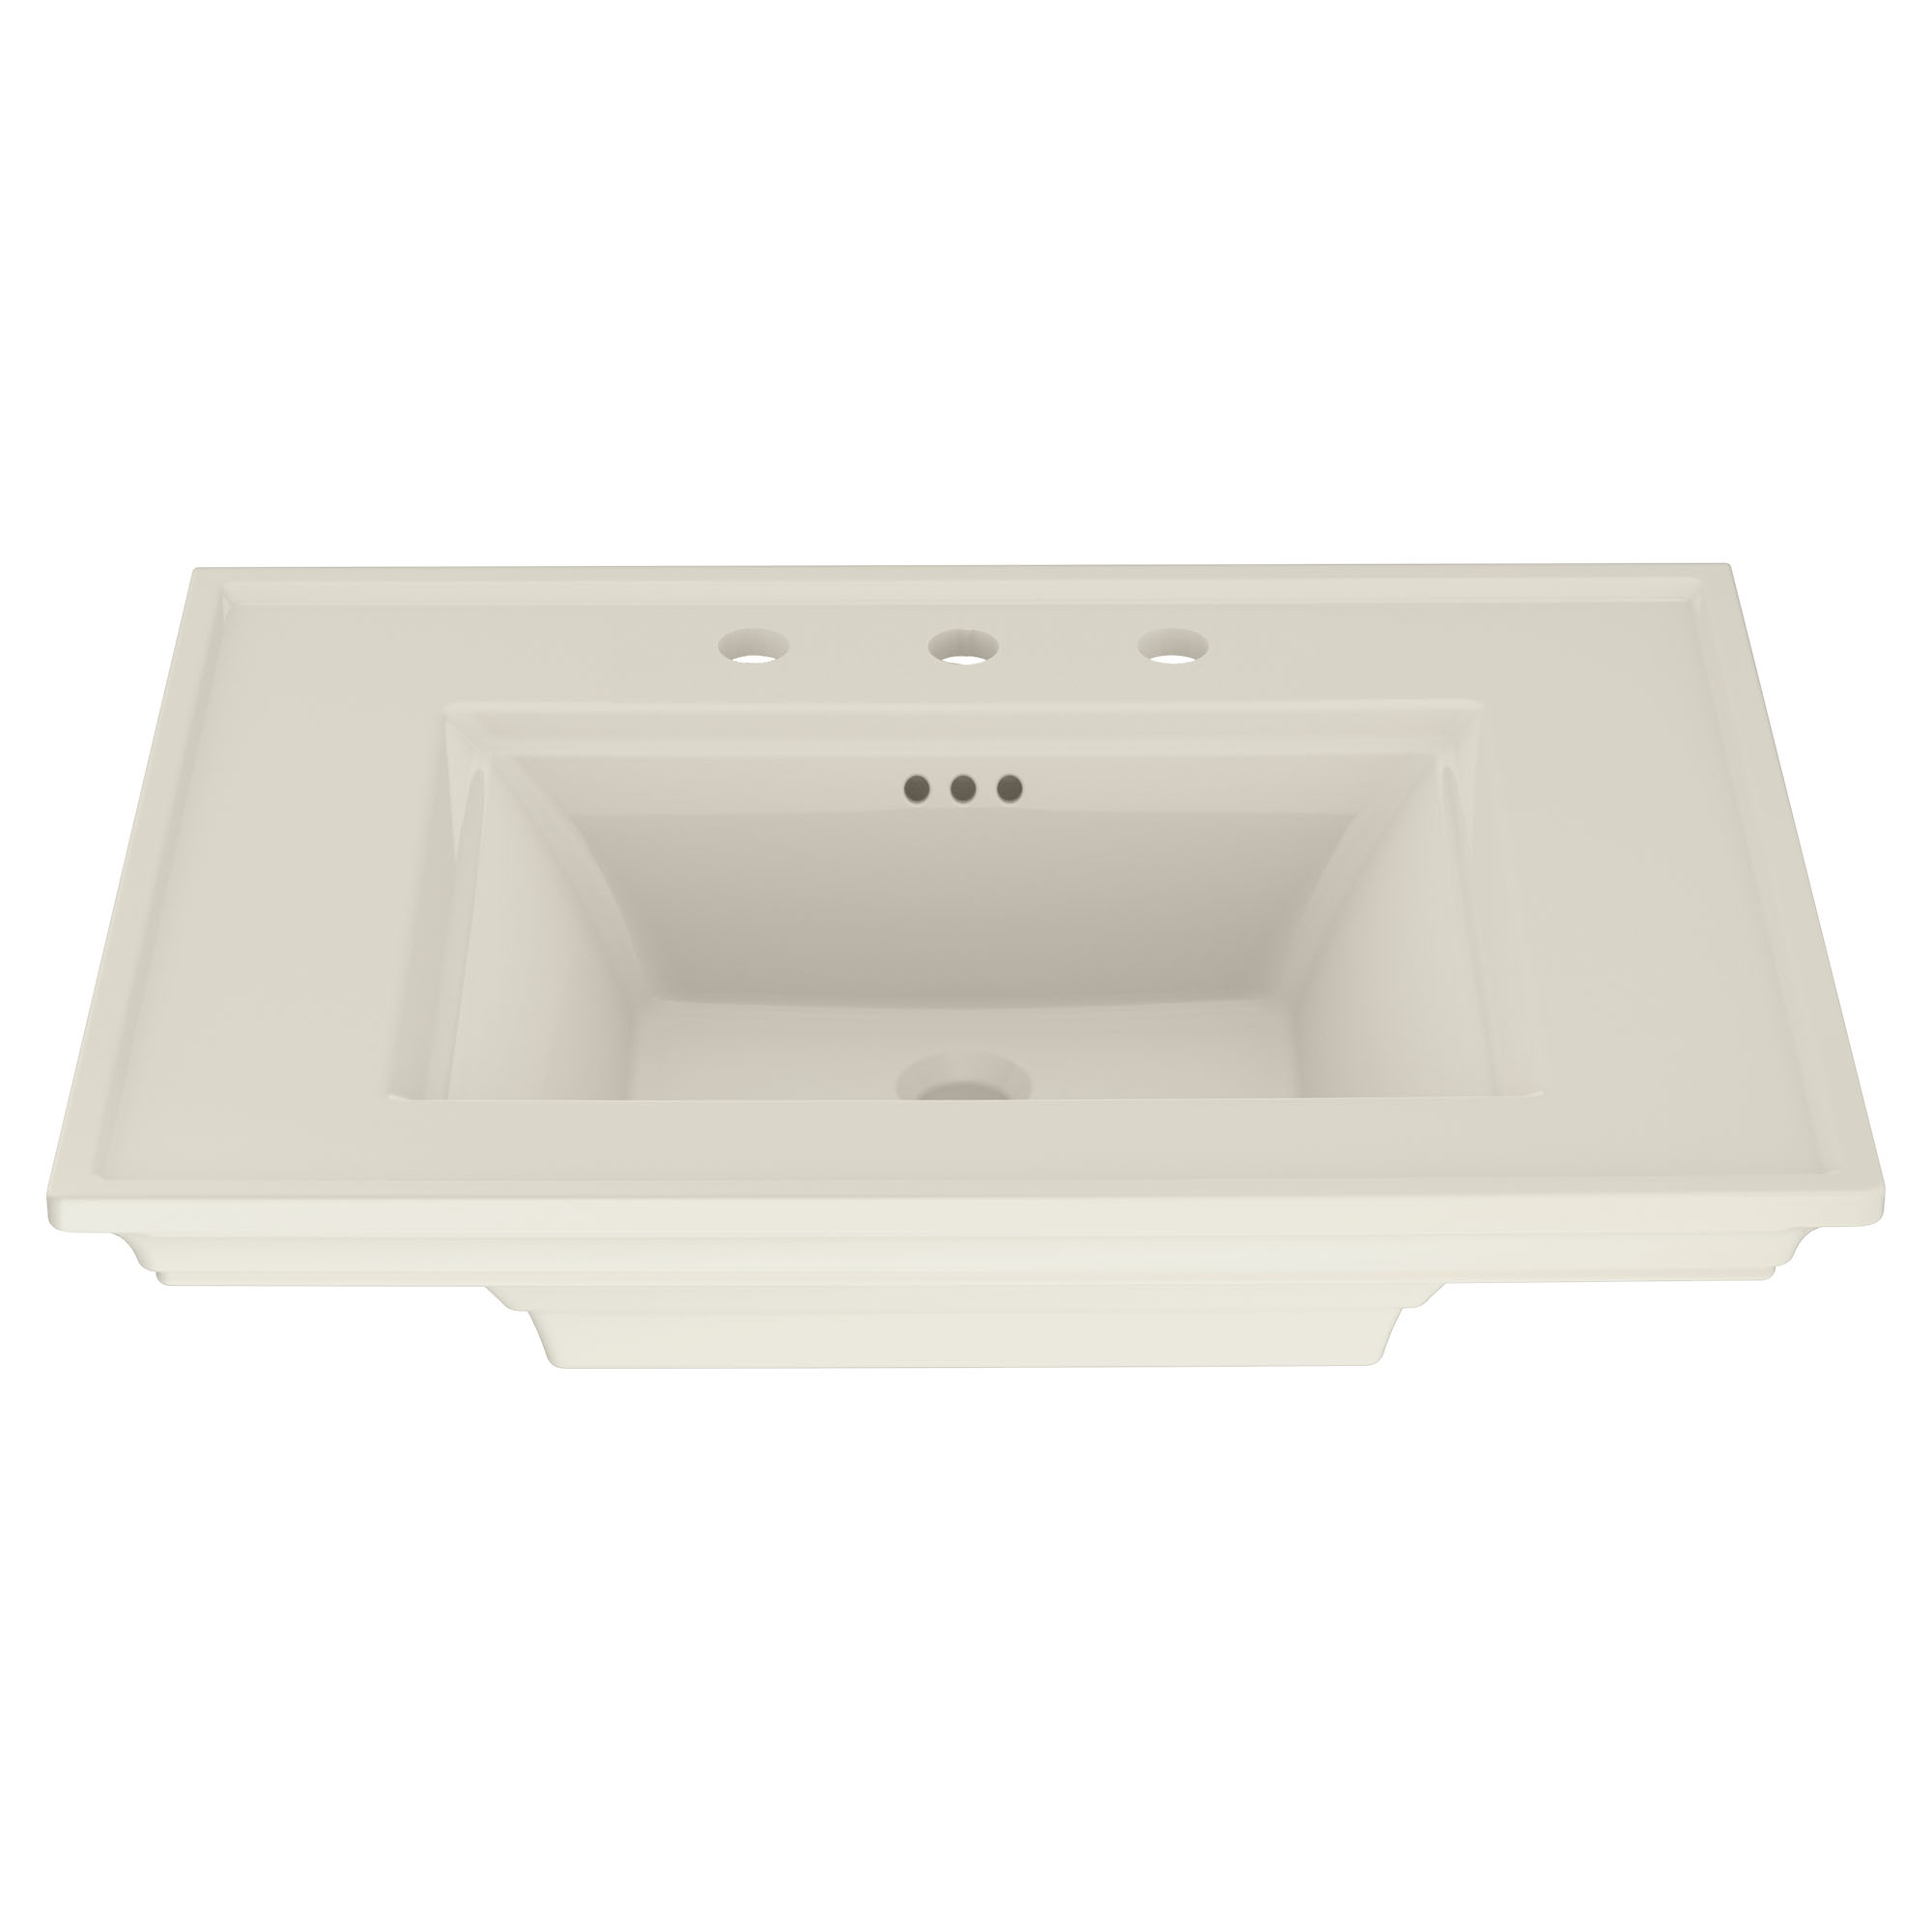 Town Square™ S 8-Inch Widespread Pedestal Sink Top